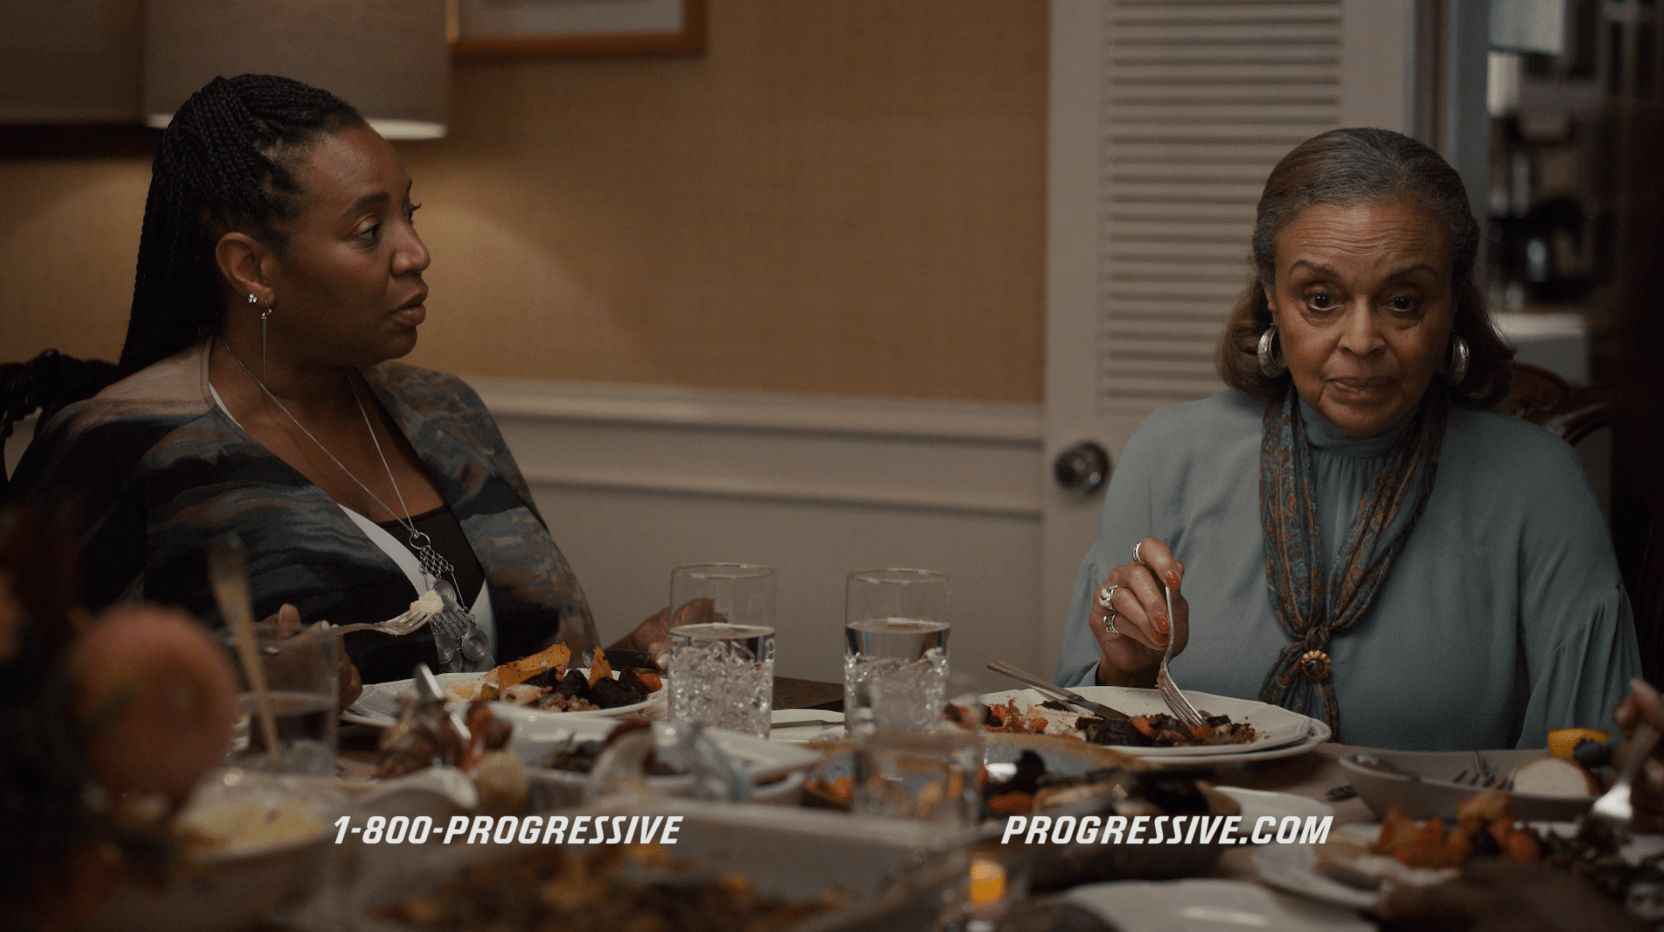  Progressive’s Replay settles disagreements during the holidays